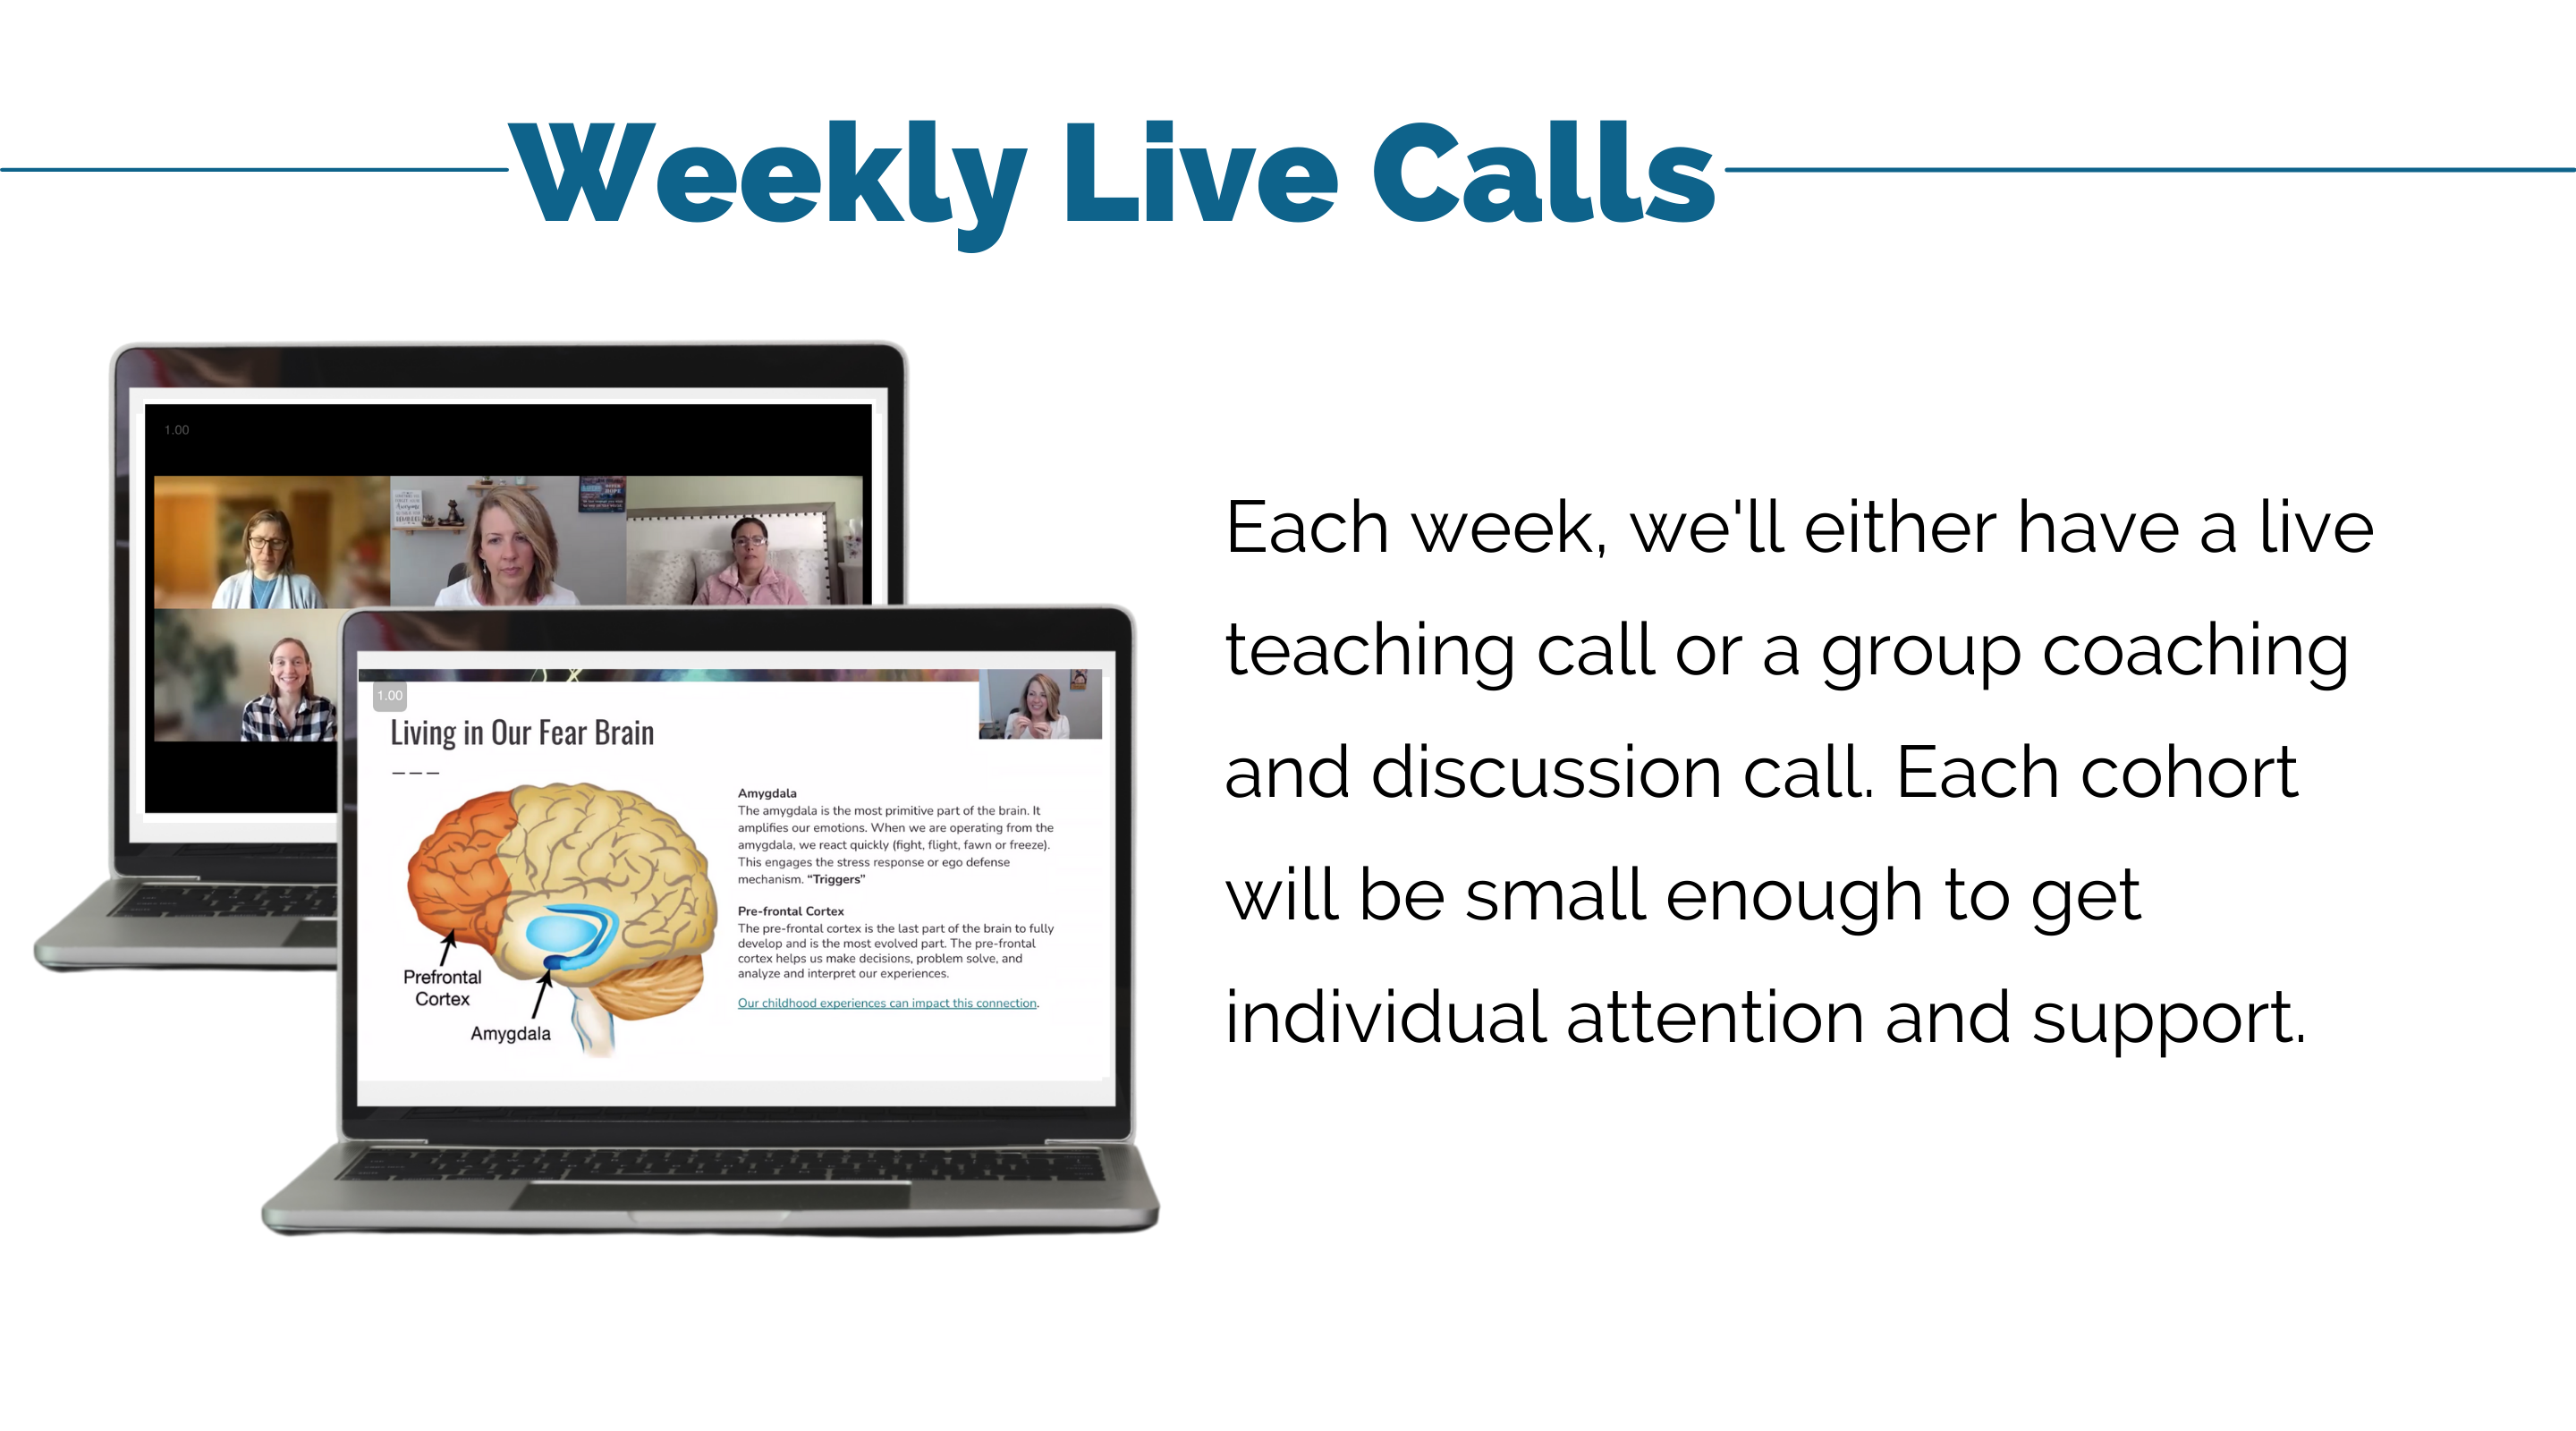 TWSW Sales Page Weekly Live Calls